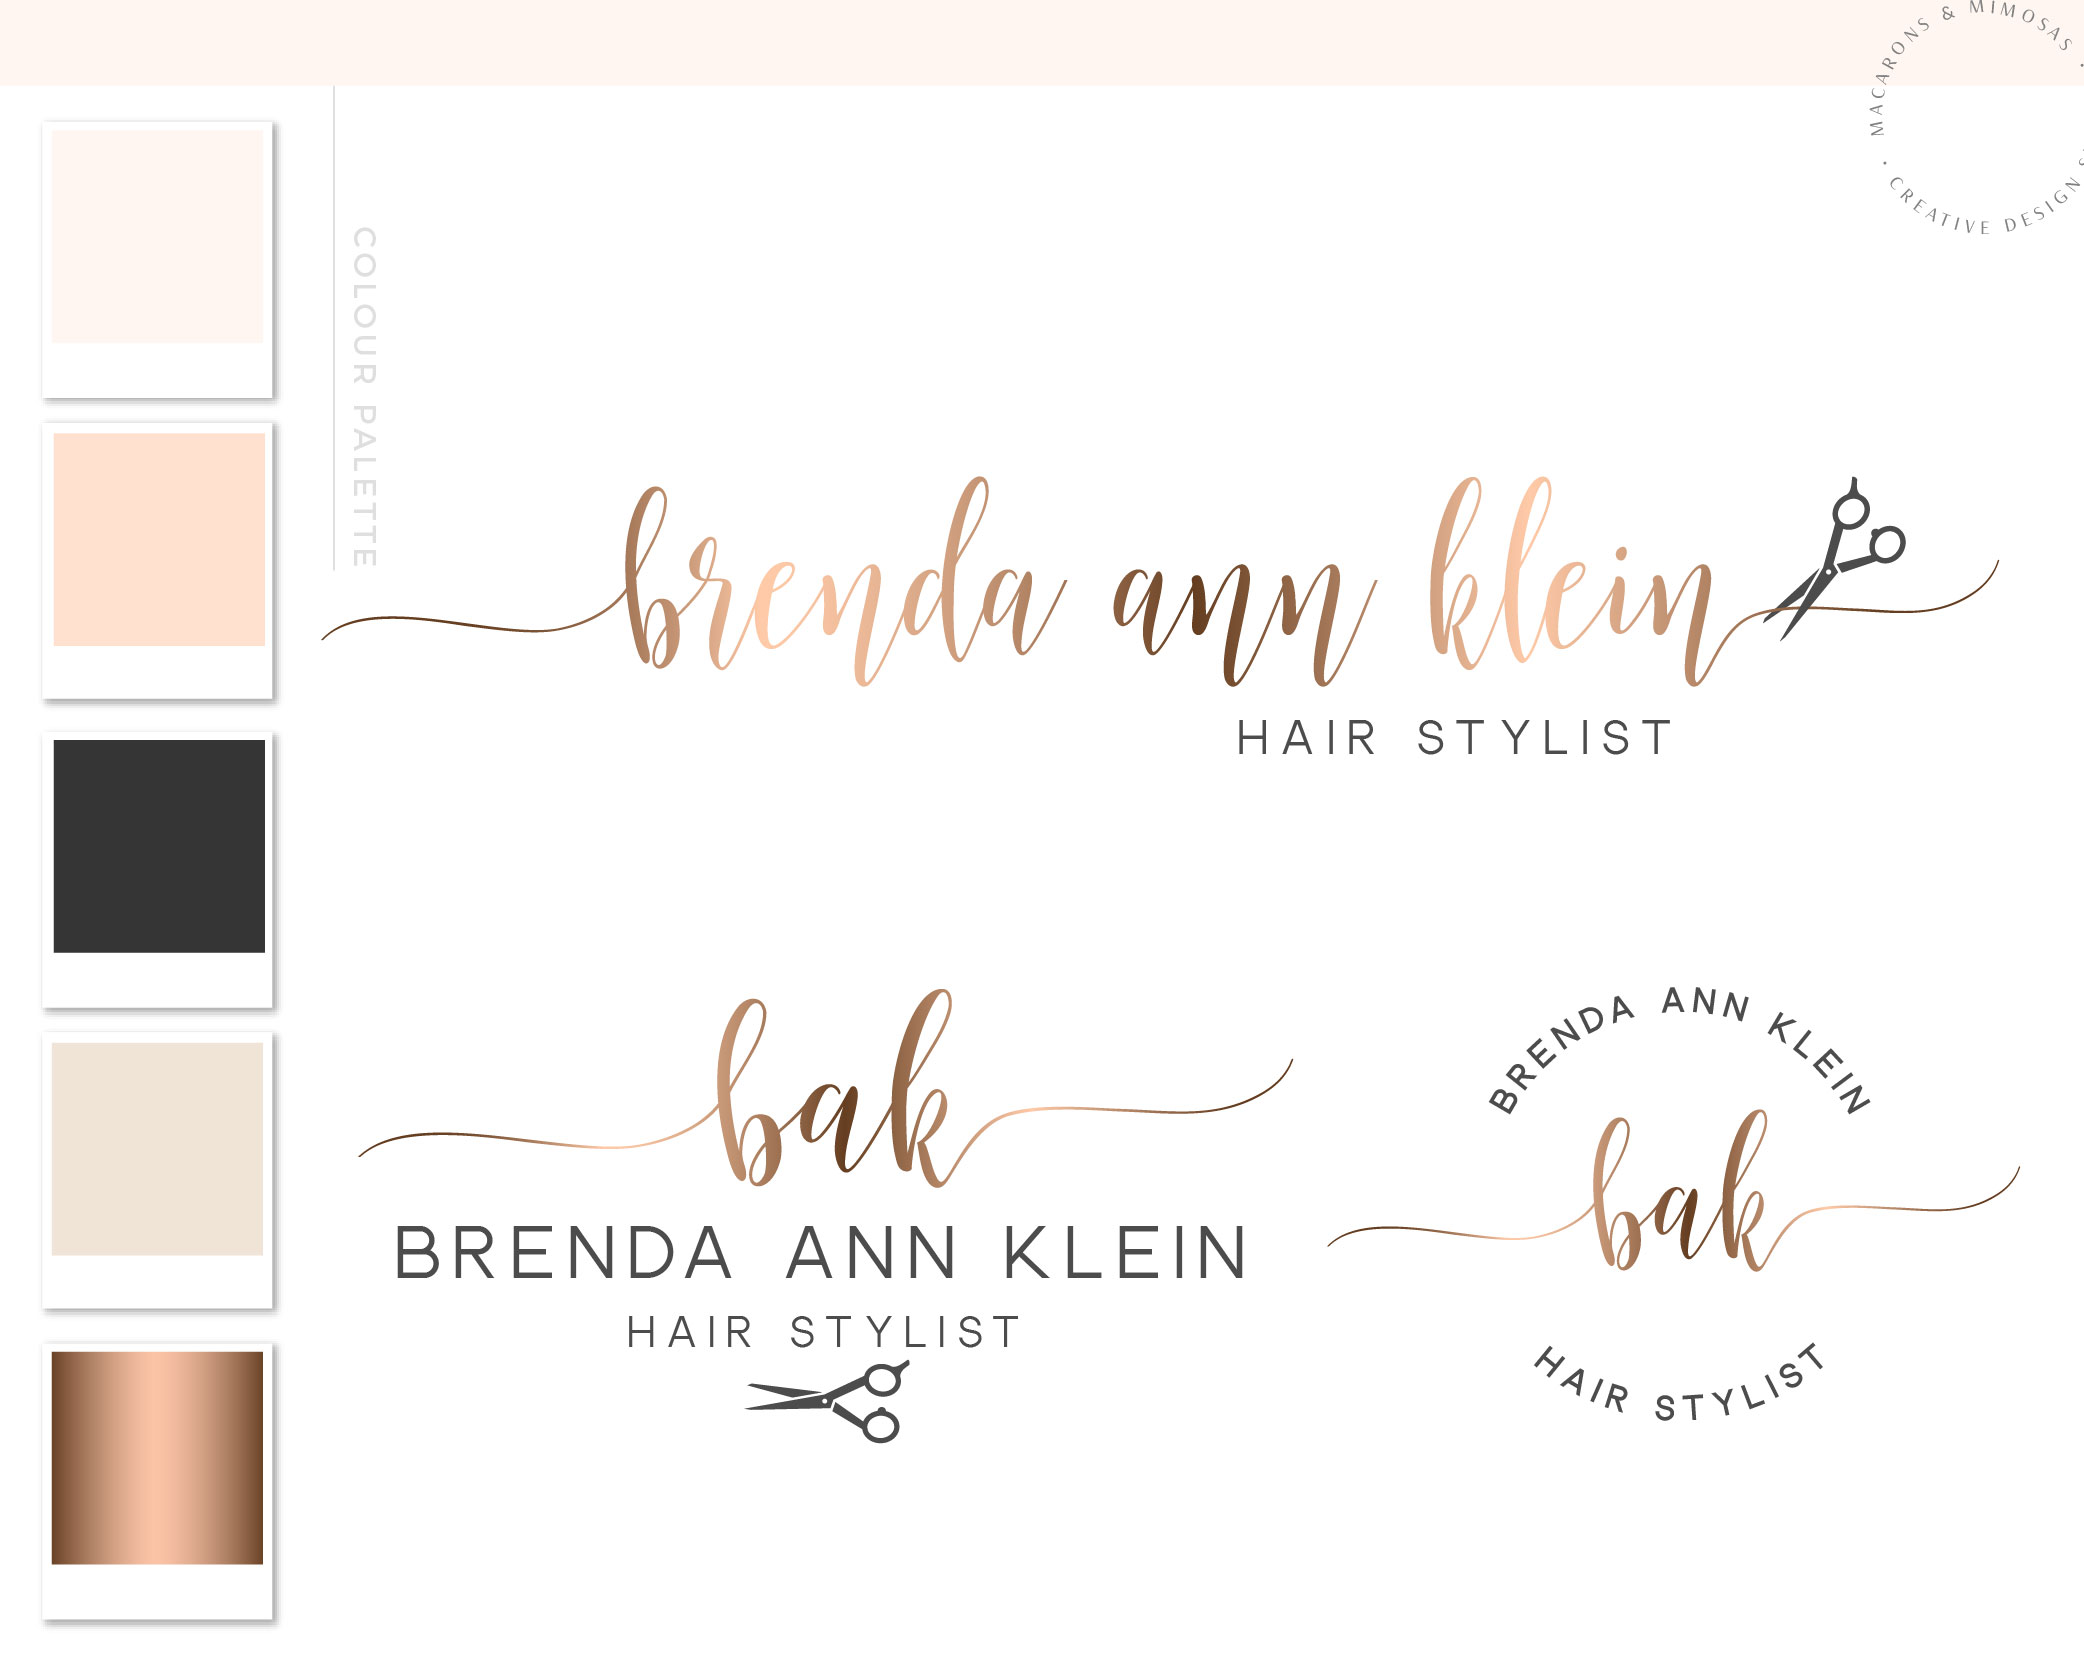 script hairstylist Scissors Logo, Beauty Branding kits, Premade Rose gold Logo, Stamp and Salon packages, fancy rose gold font marketing kits